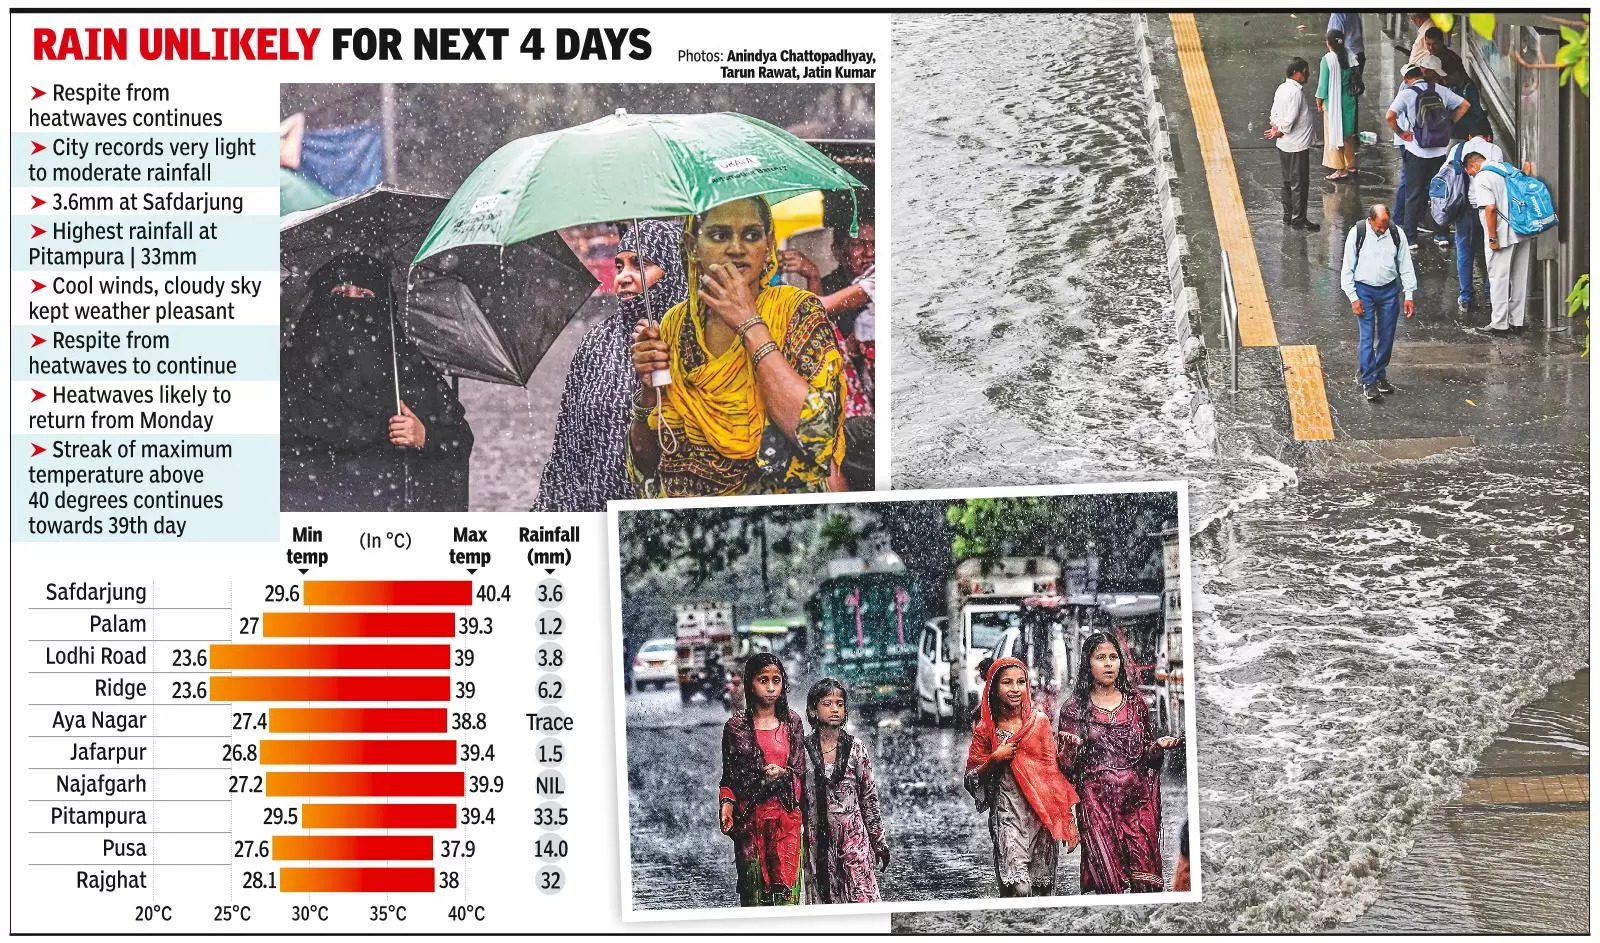 Reined In By Rain! Heatwave Relents, But Will Be Back